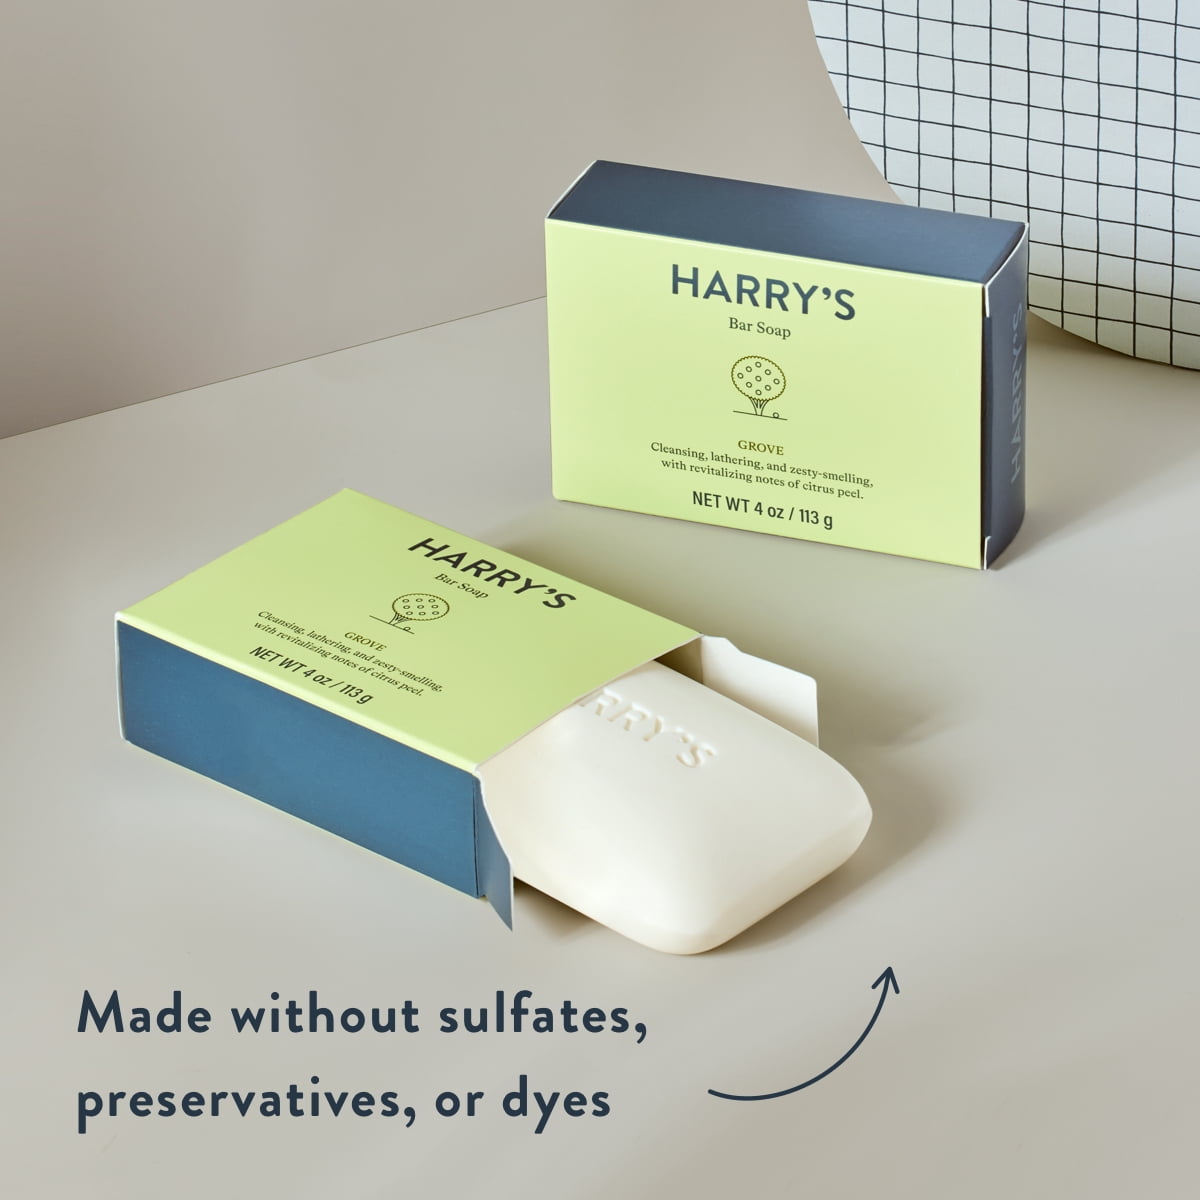 New Harry's Grove Bar Soap - 4 bar soaps - health and beauty - by owner -  household sale - craigslist